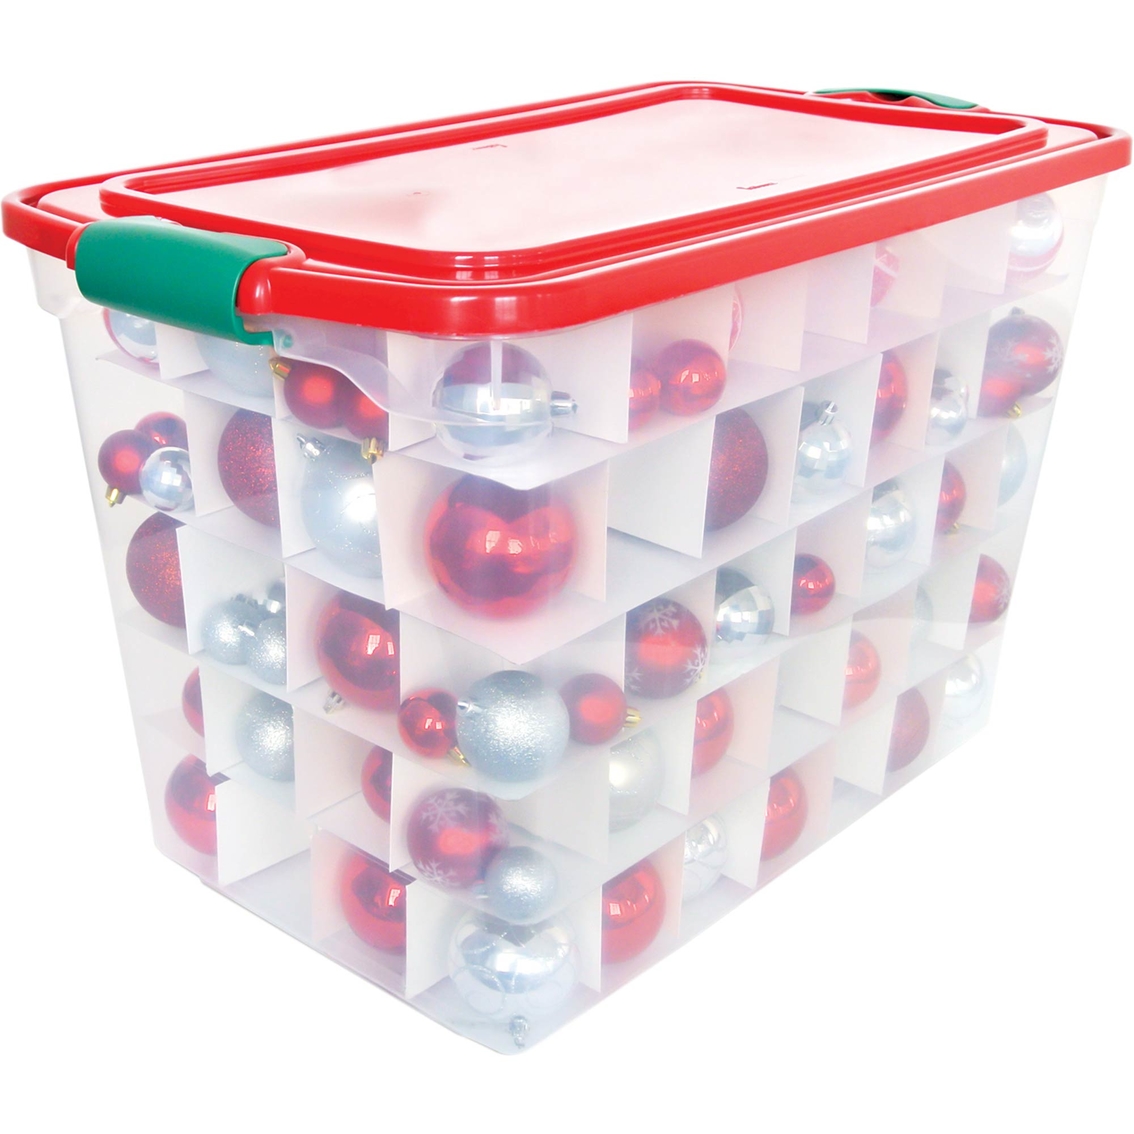 Homz 36-Count Latching Clear Ornament Storage Container with Dividers